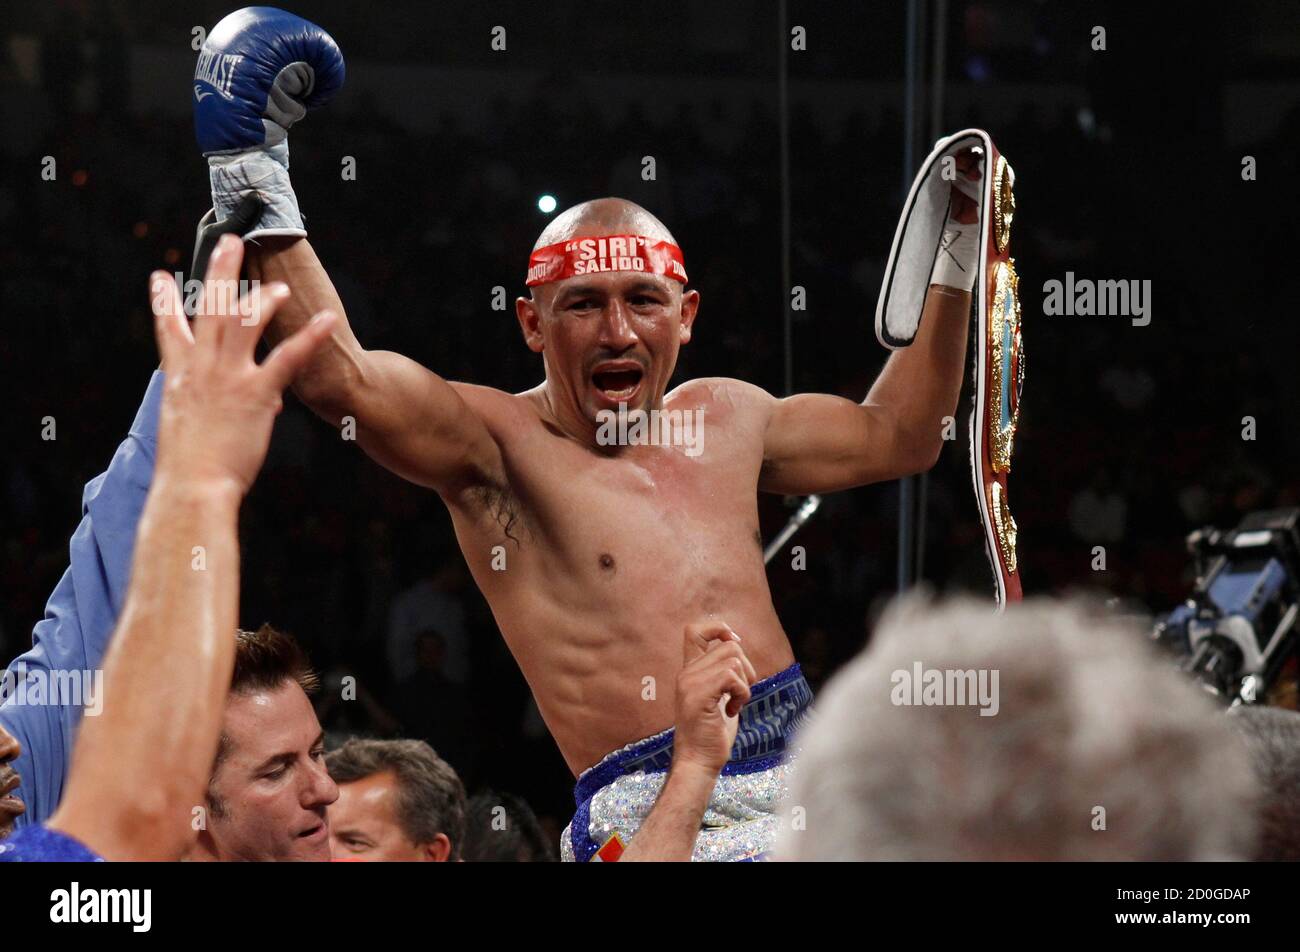 Featherweight Boxer High Resolution Stock Photography and Images - Alamy